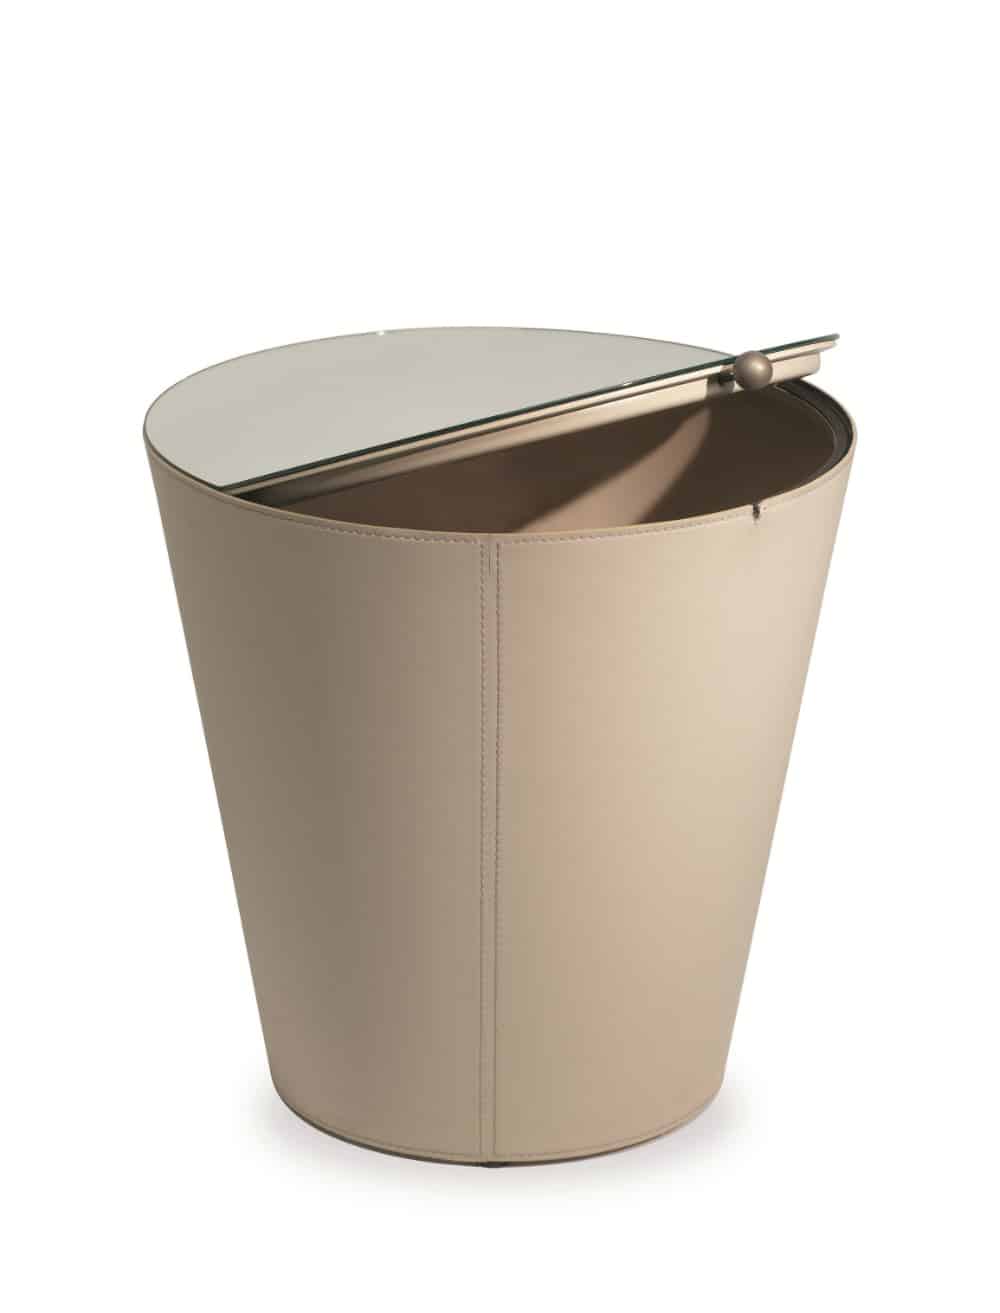 Conico bedside table by Cantori